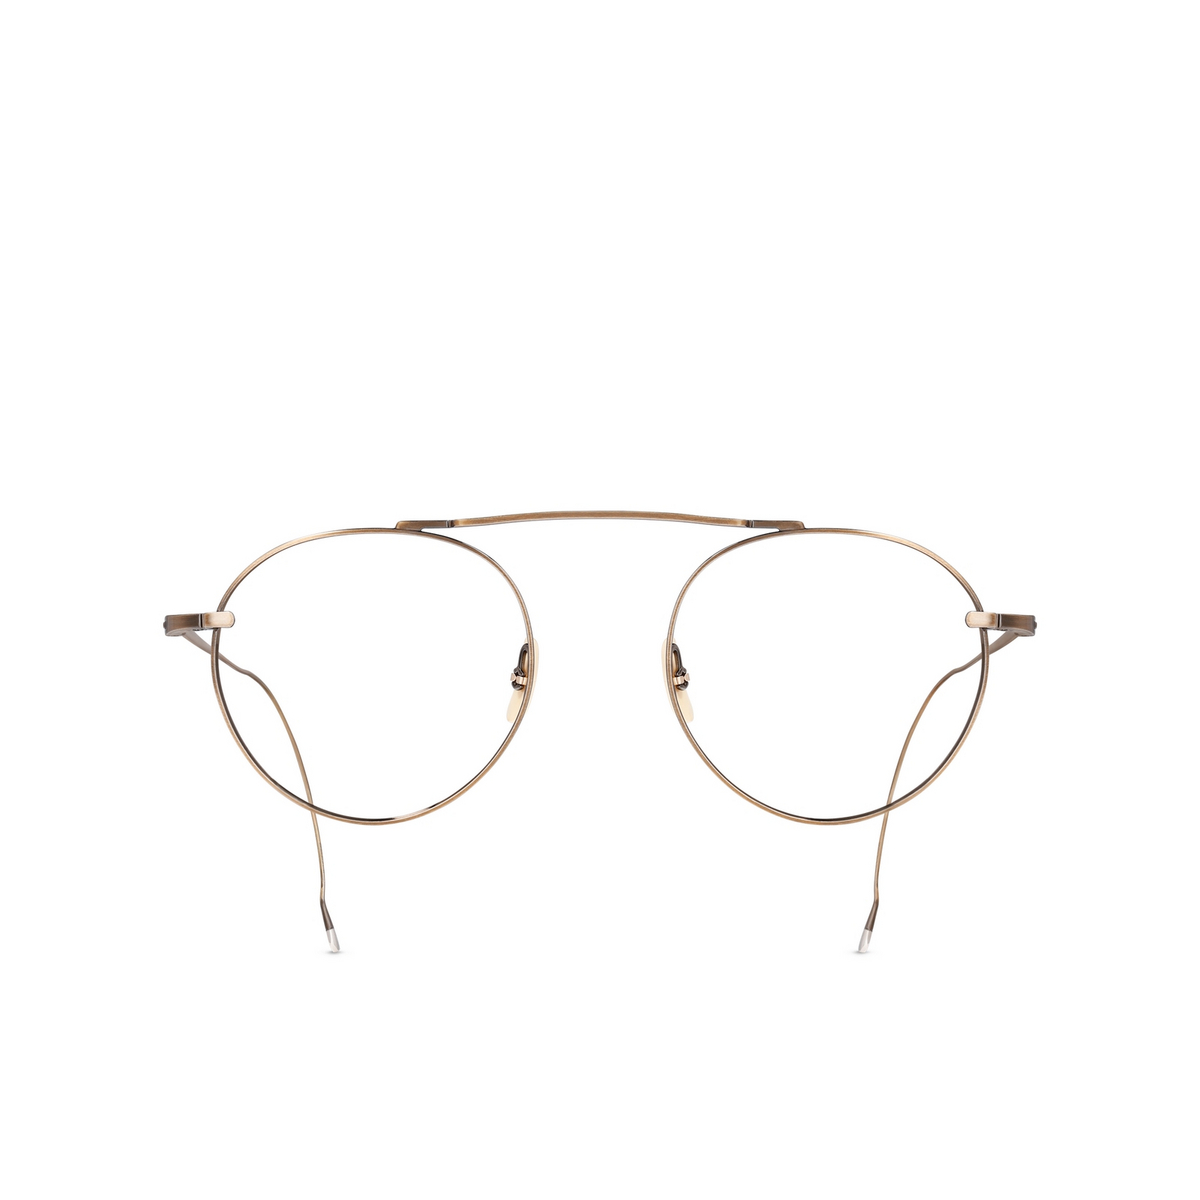 Mr. Leight REI C Eyeglasses ATG Antique Gold - front view